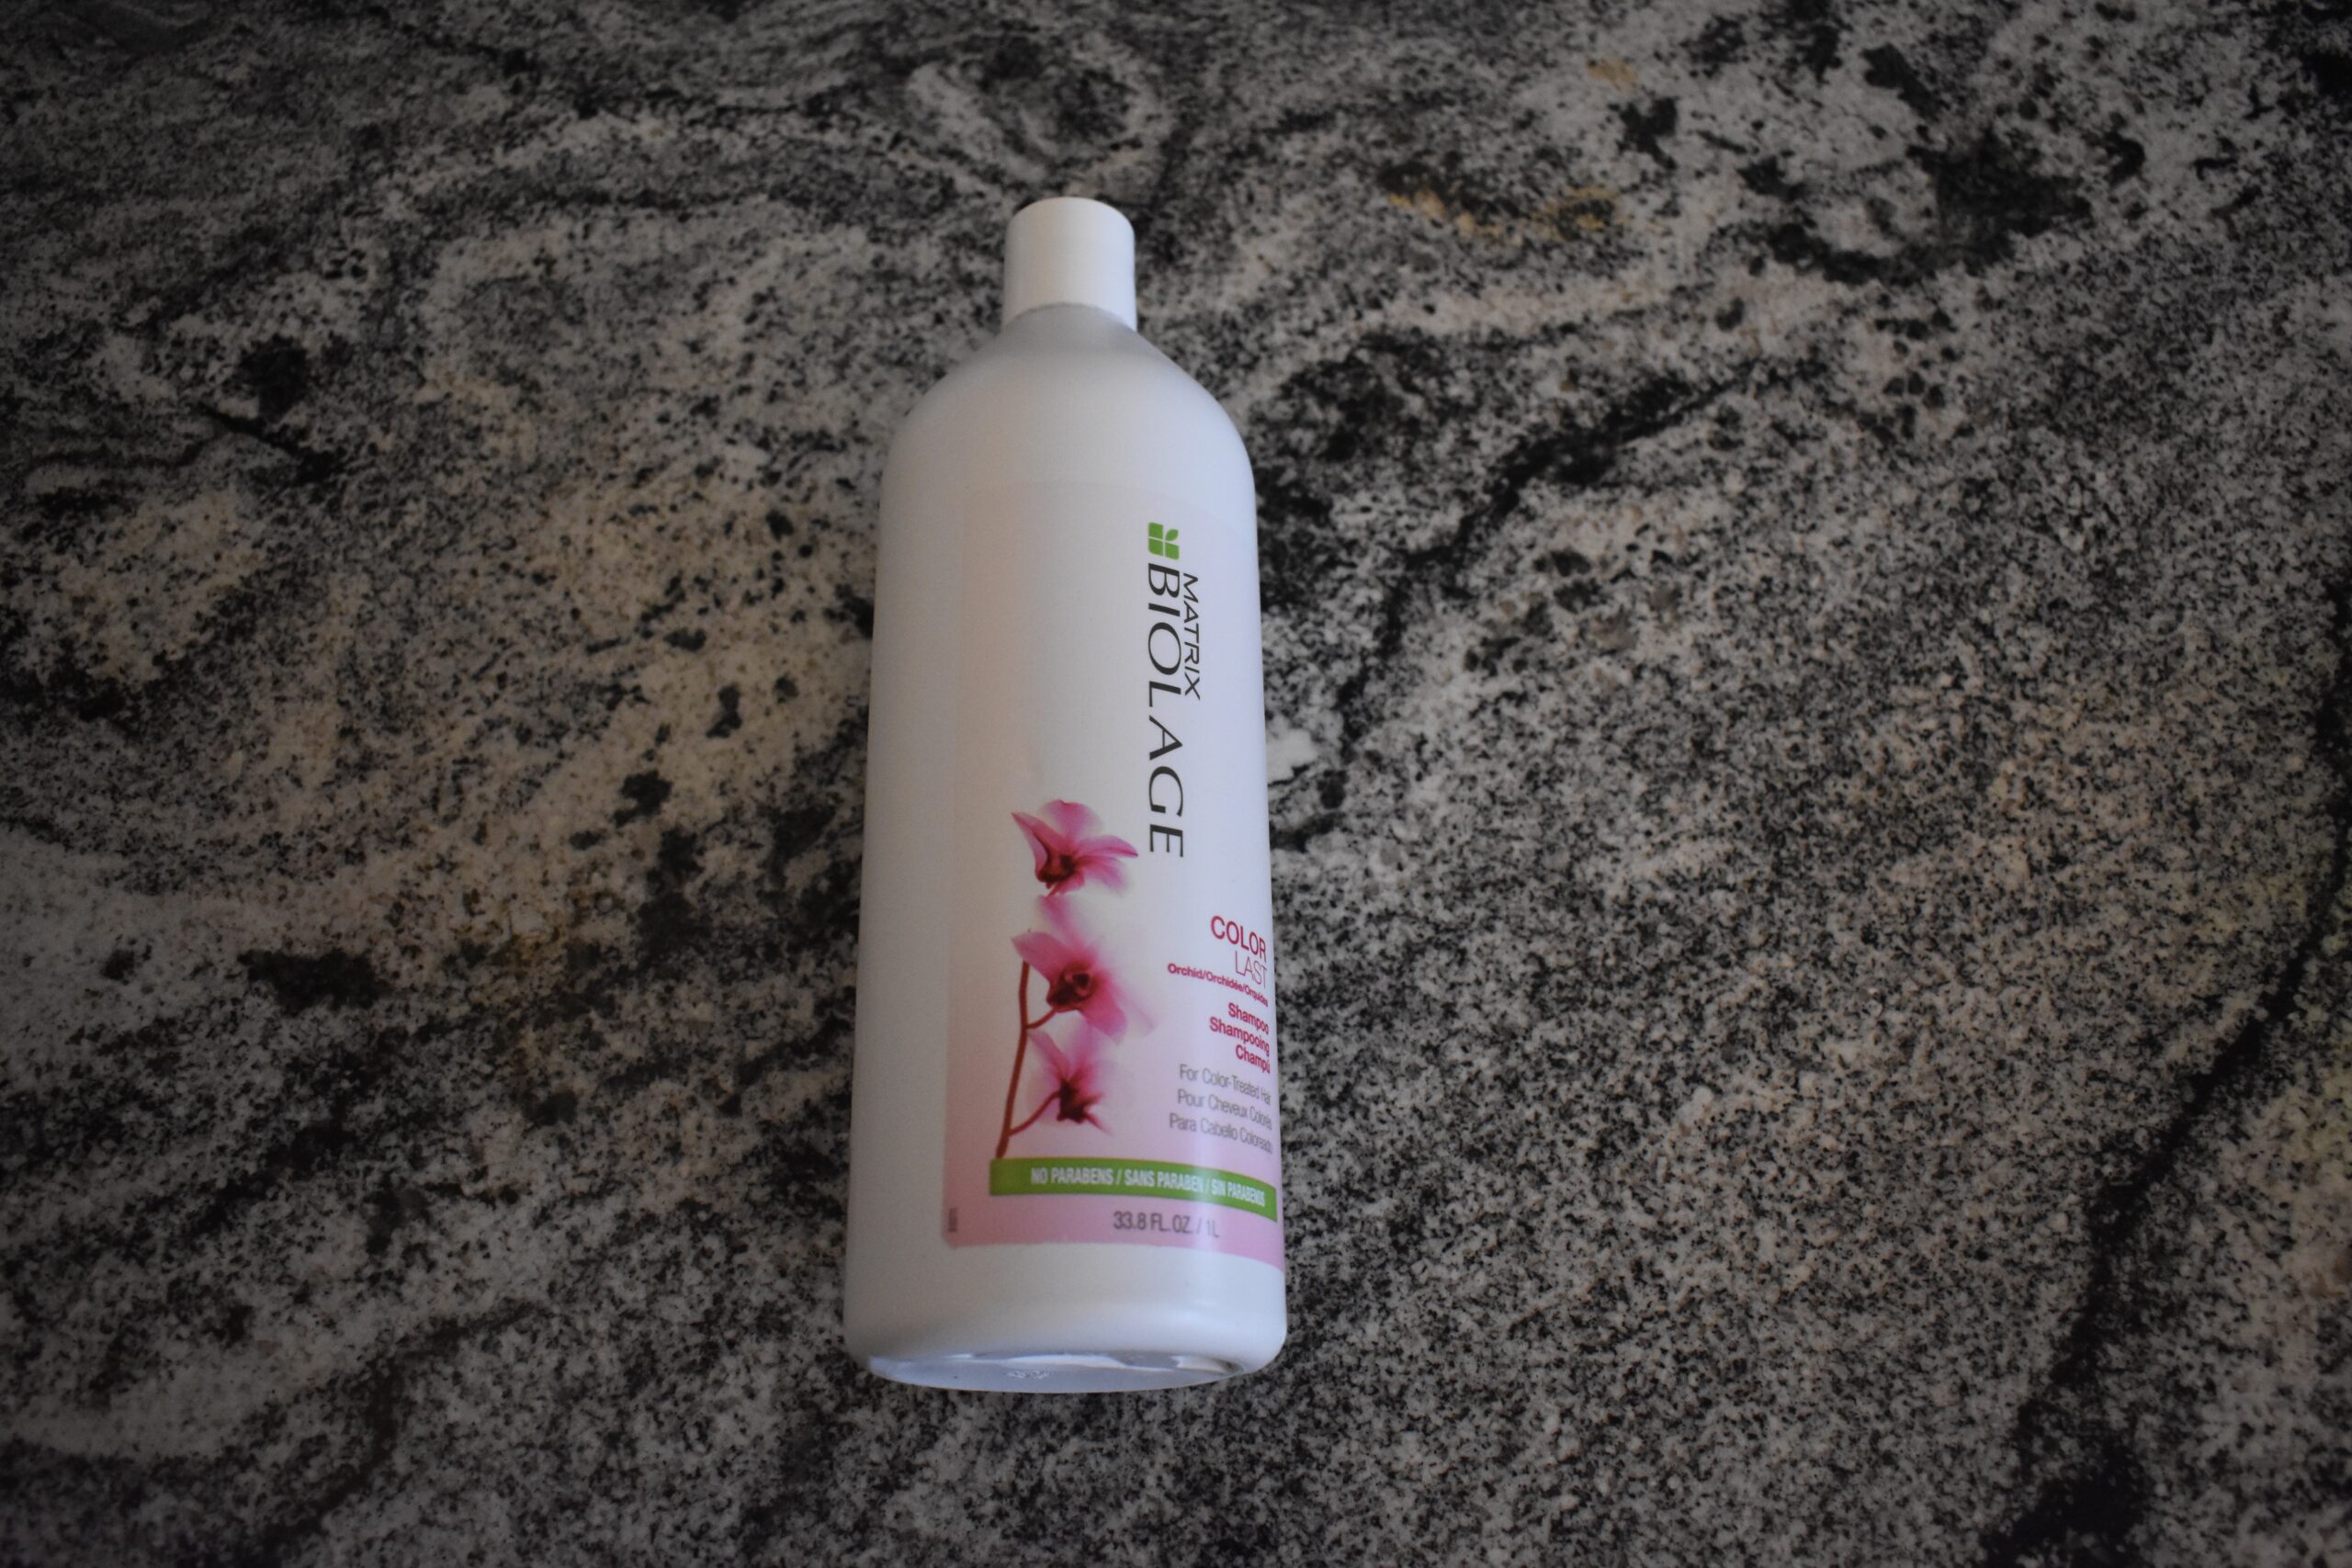 Bottle of Biolage colorlast shampoo sitting on a counter. it's one of the best shampoos you can buy.